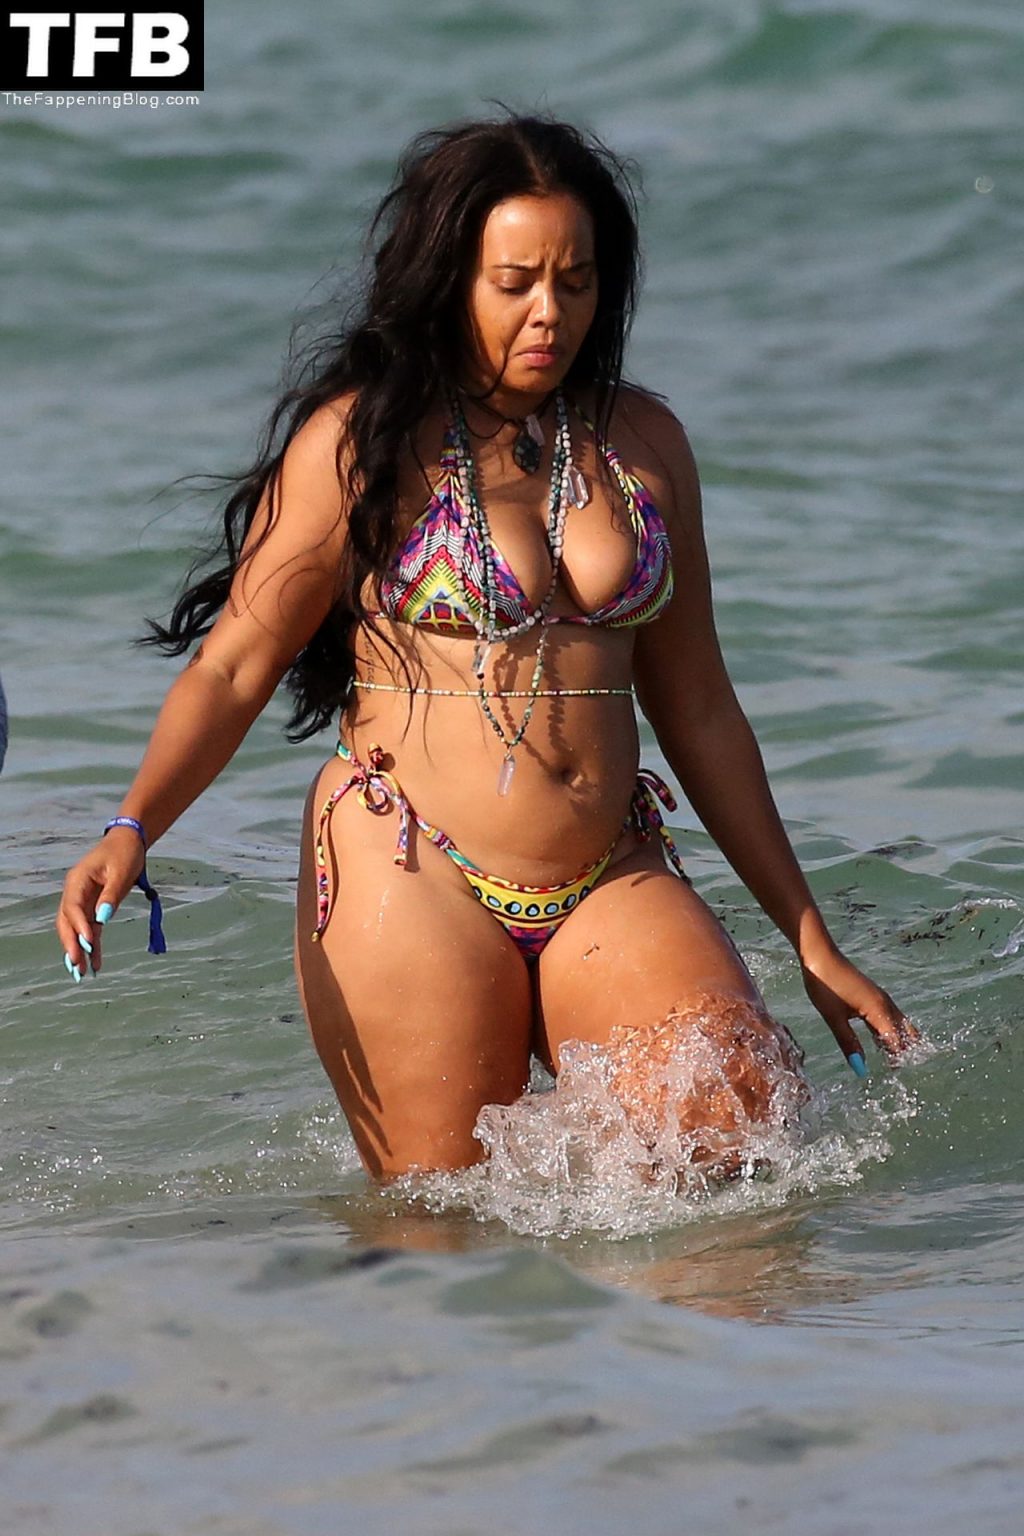 Angela Simmons Shows Off Her Curves on the Beach in Miami (18 Photos)